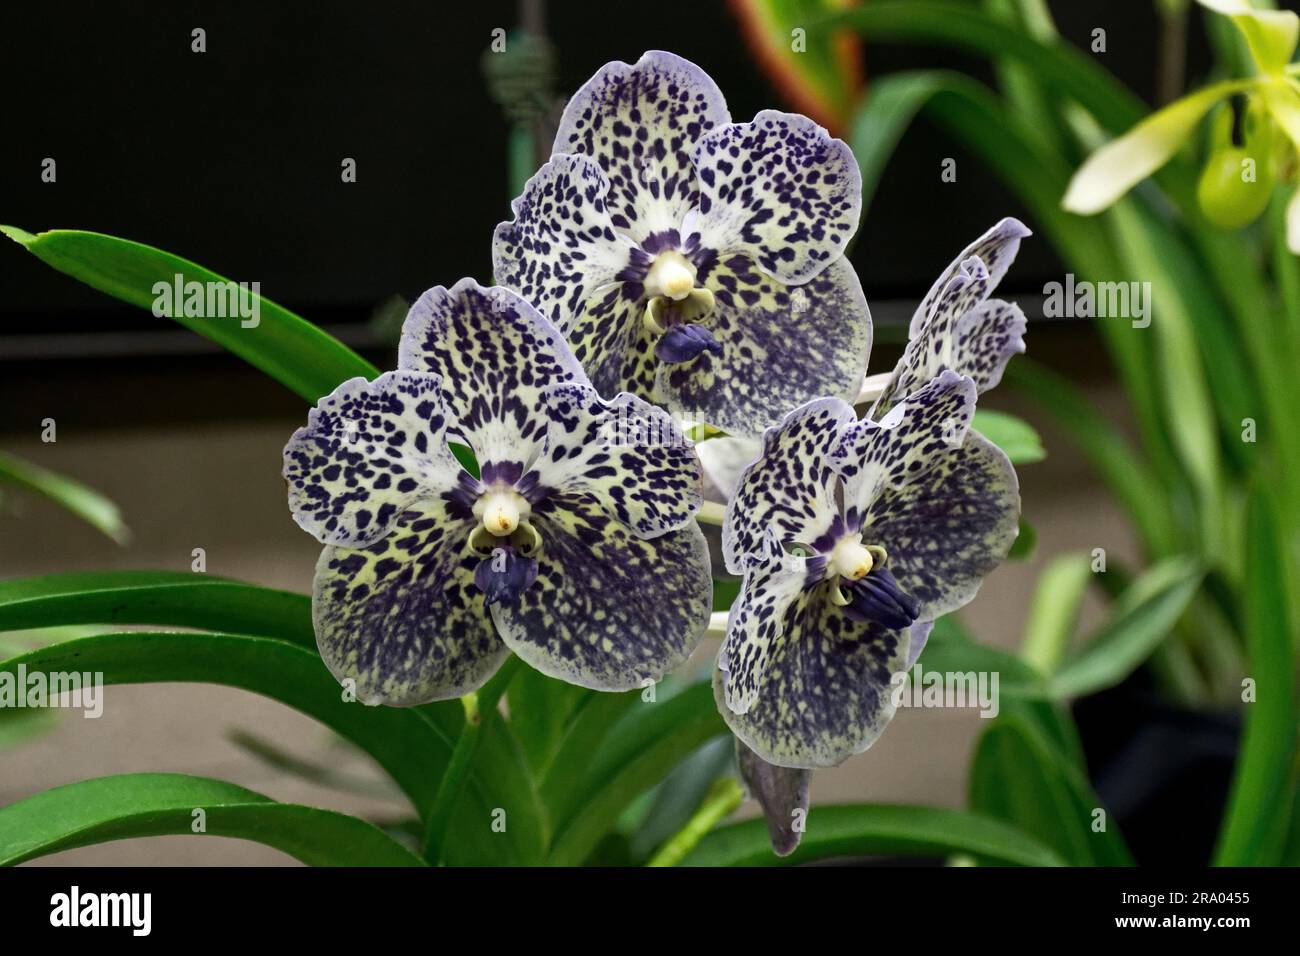 Closeup picture of white and blue orchid flowers Stock Photo